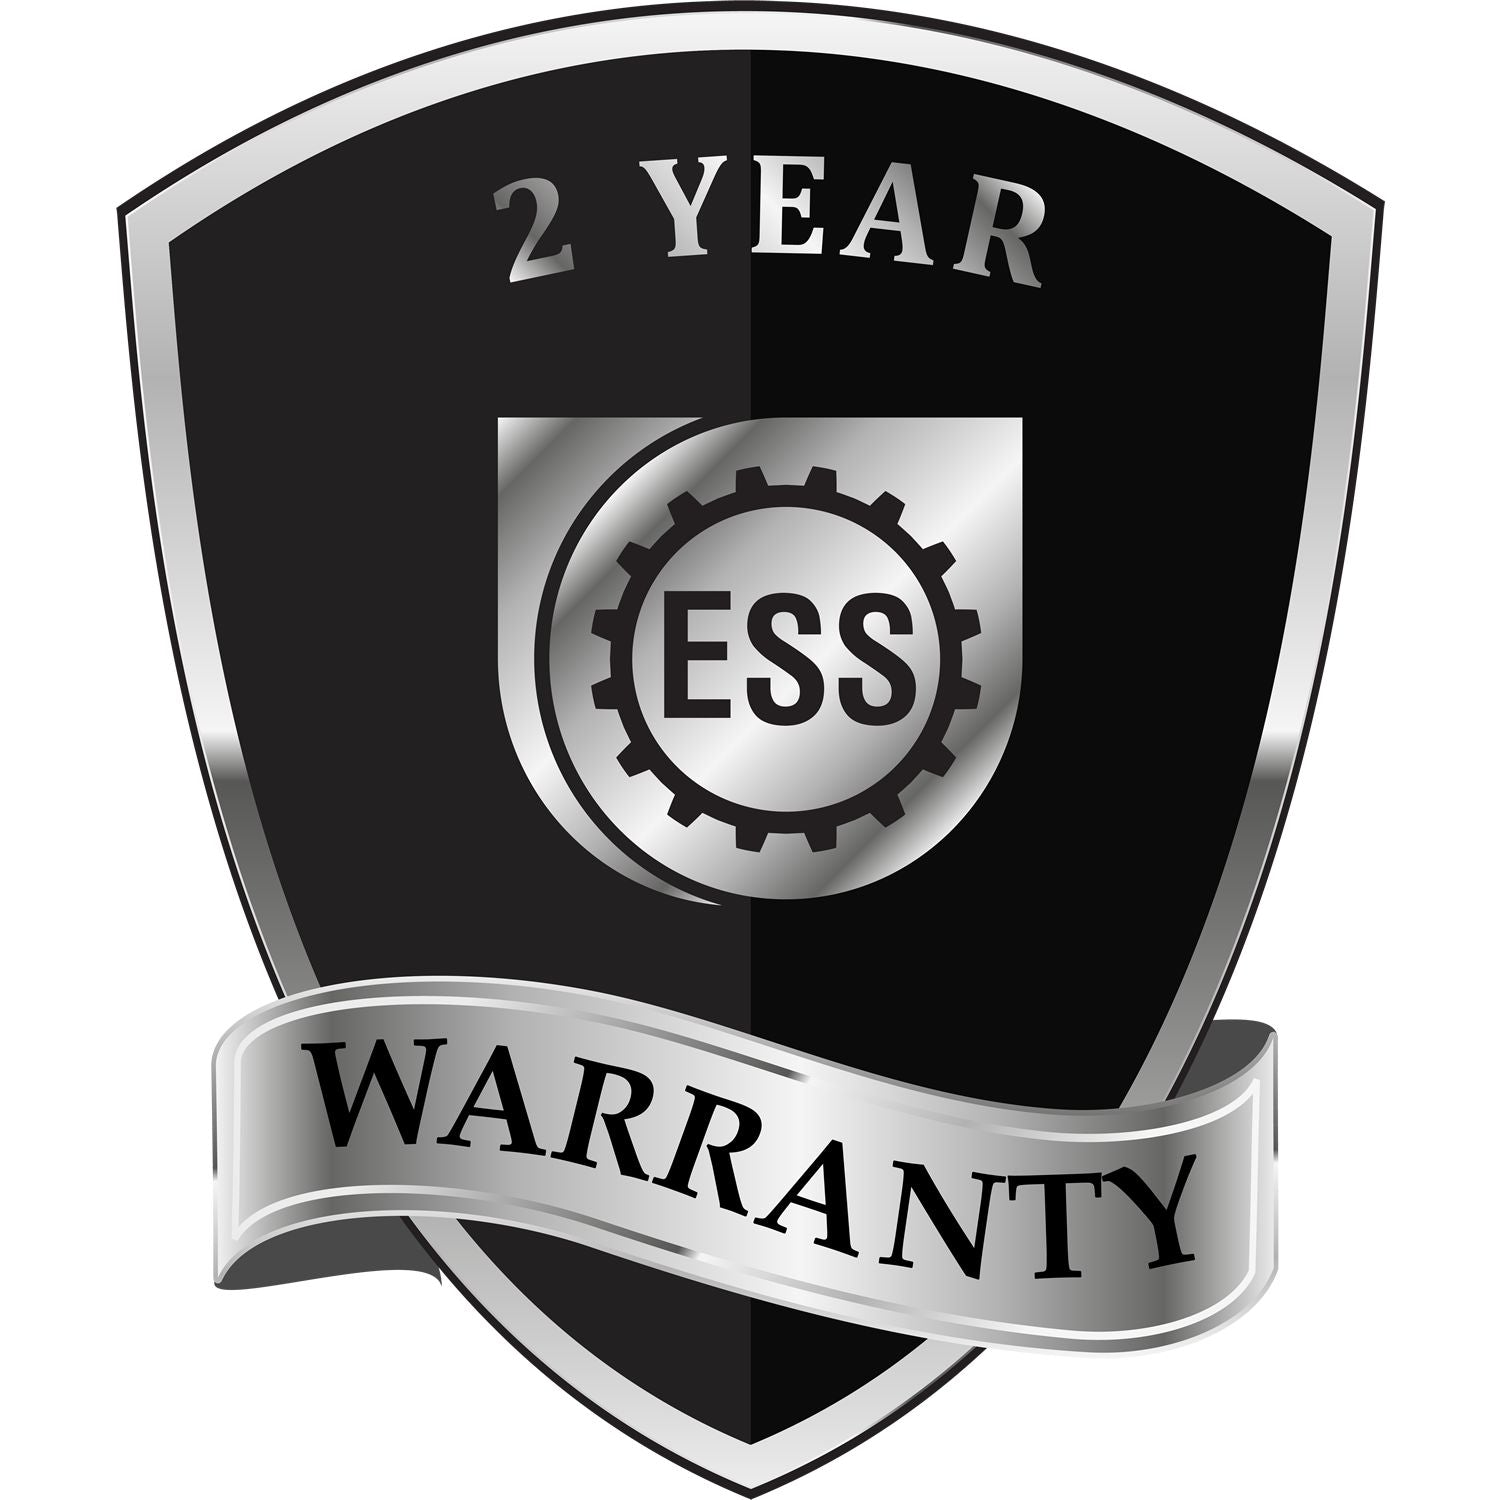 A badge or emblem showing a warranty icon for the Long Reach Oregon PE Seal